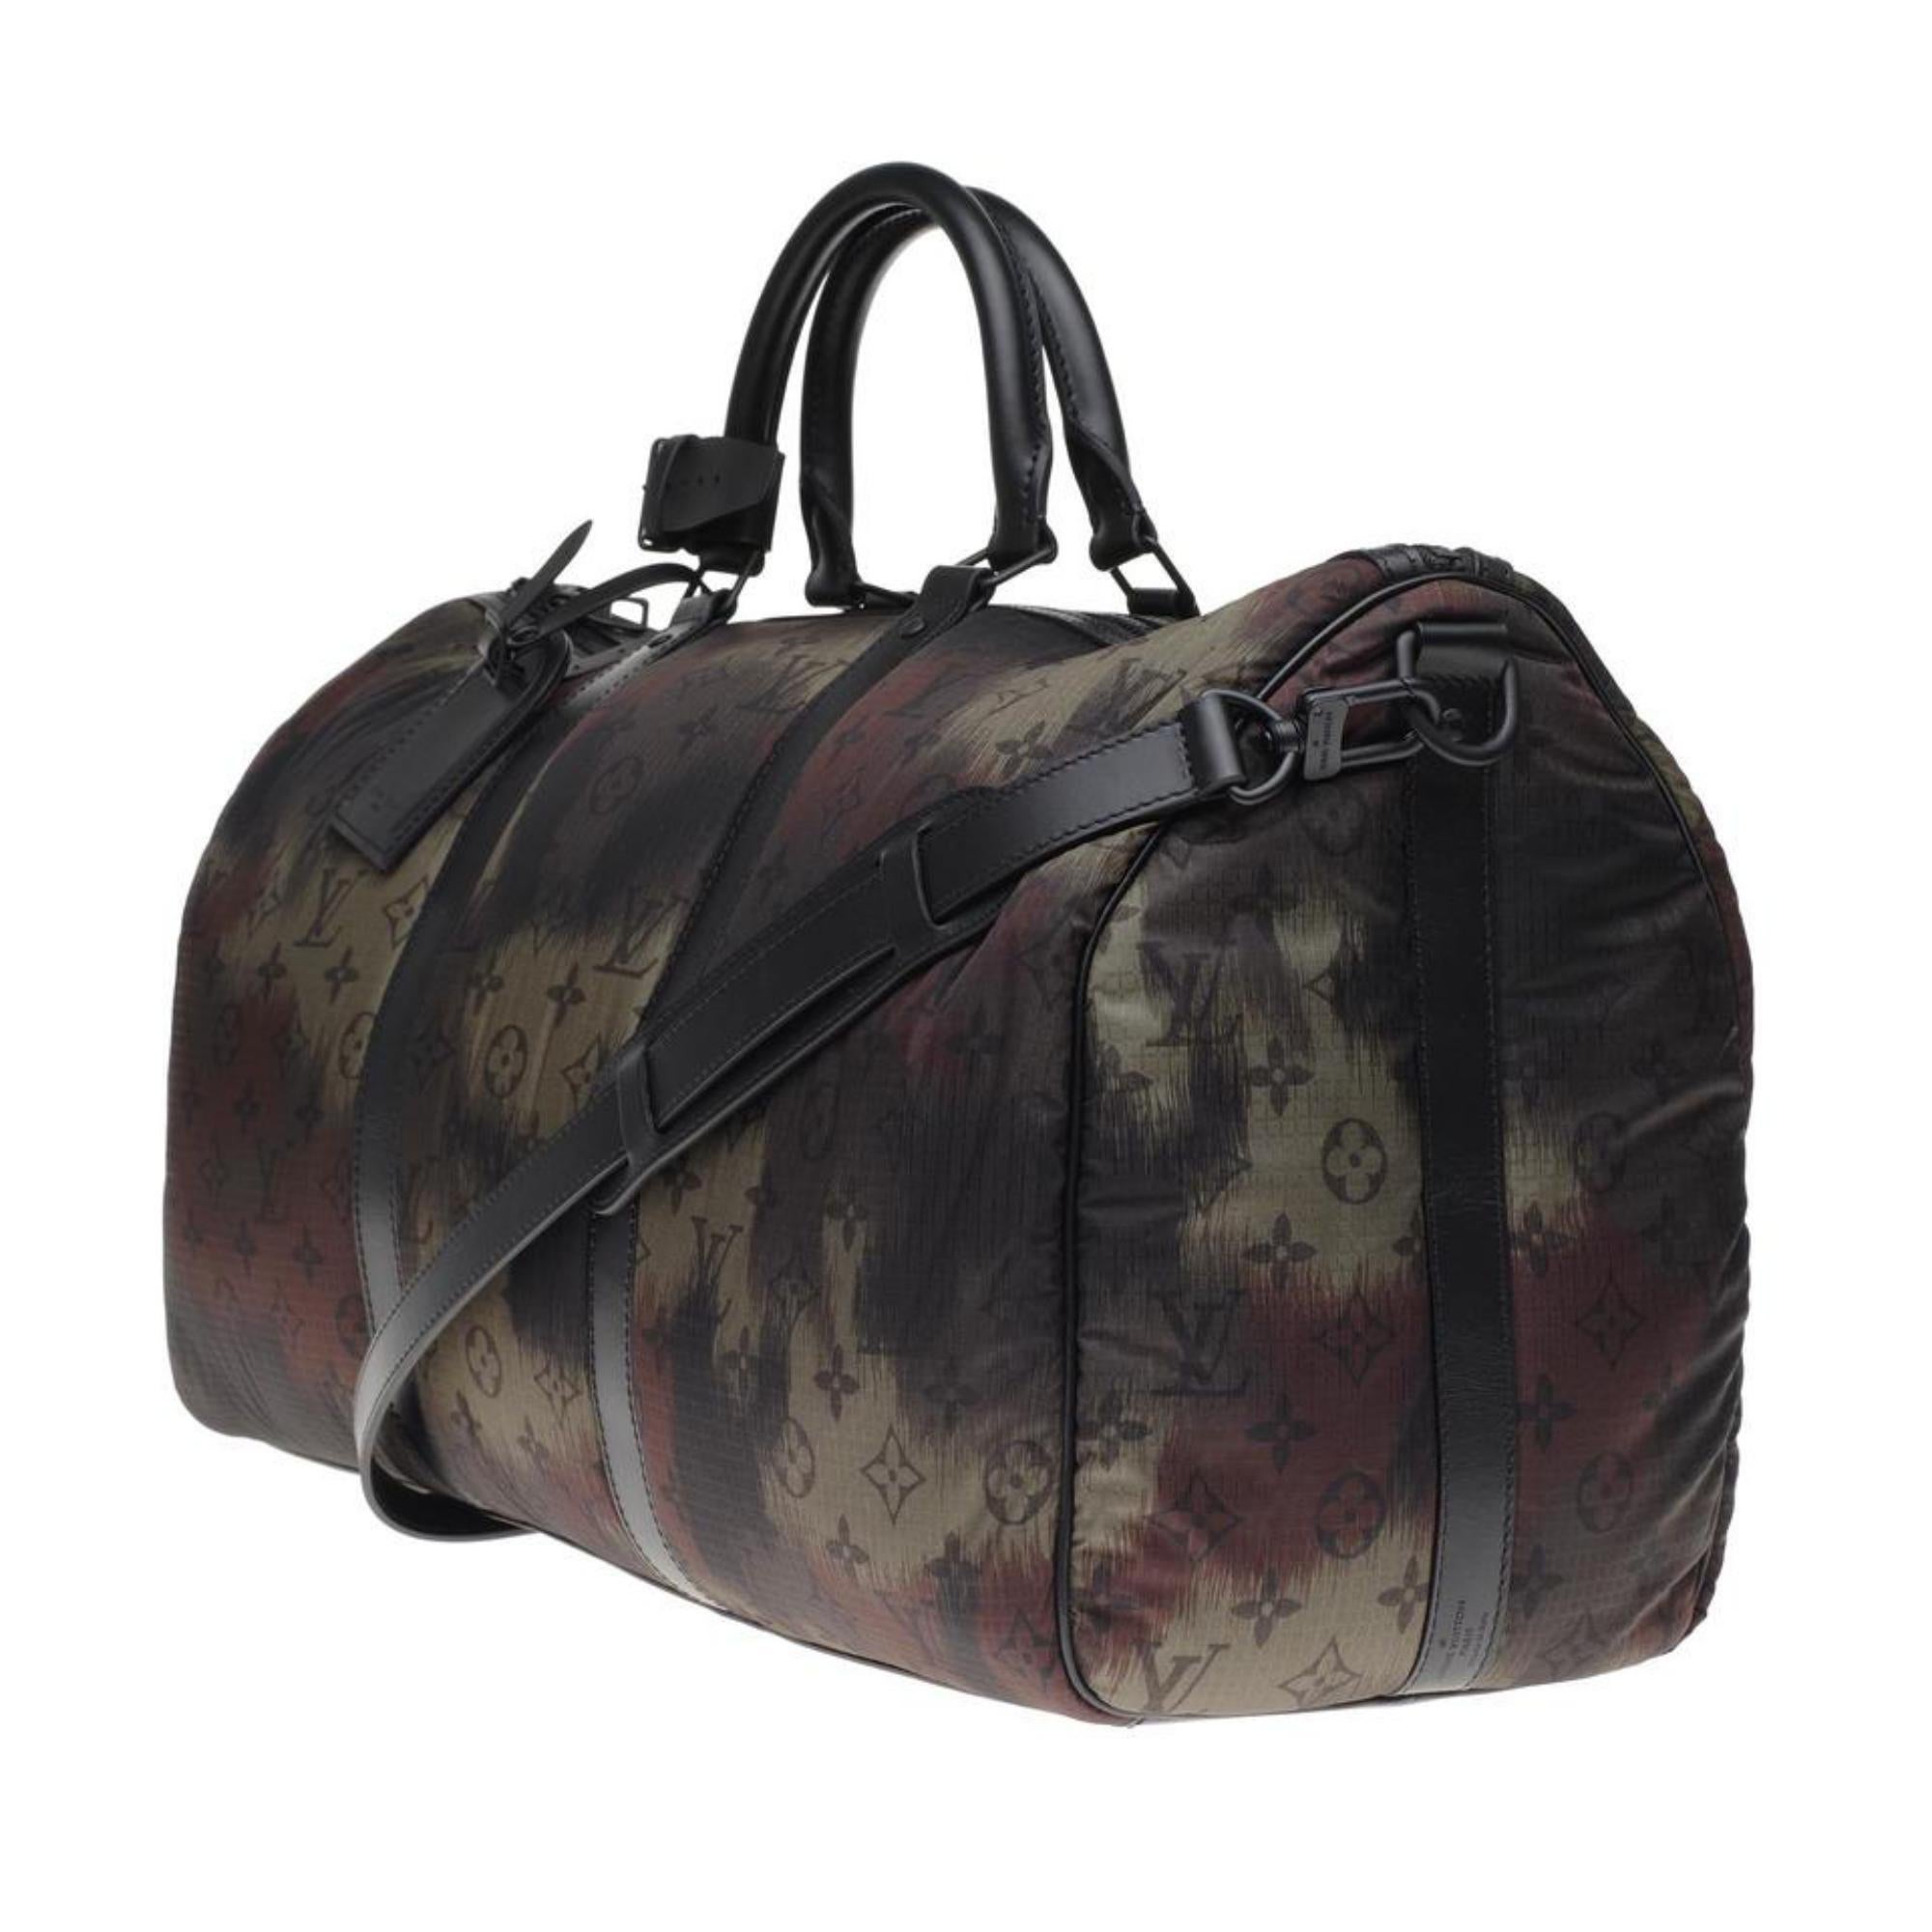 Louis Vuitton Limited Camouflage Monogram Camo Keepall Bandouliere 50 Strap 1122lv55
Date Code/Serial Number: FZ2270
Made in Italy
Measurements: Length:  20